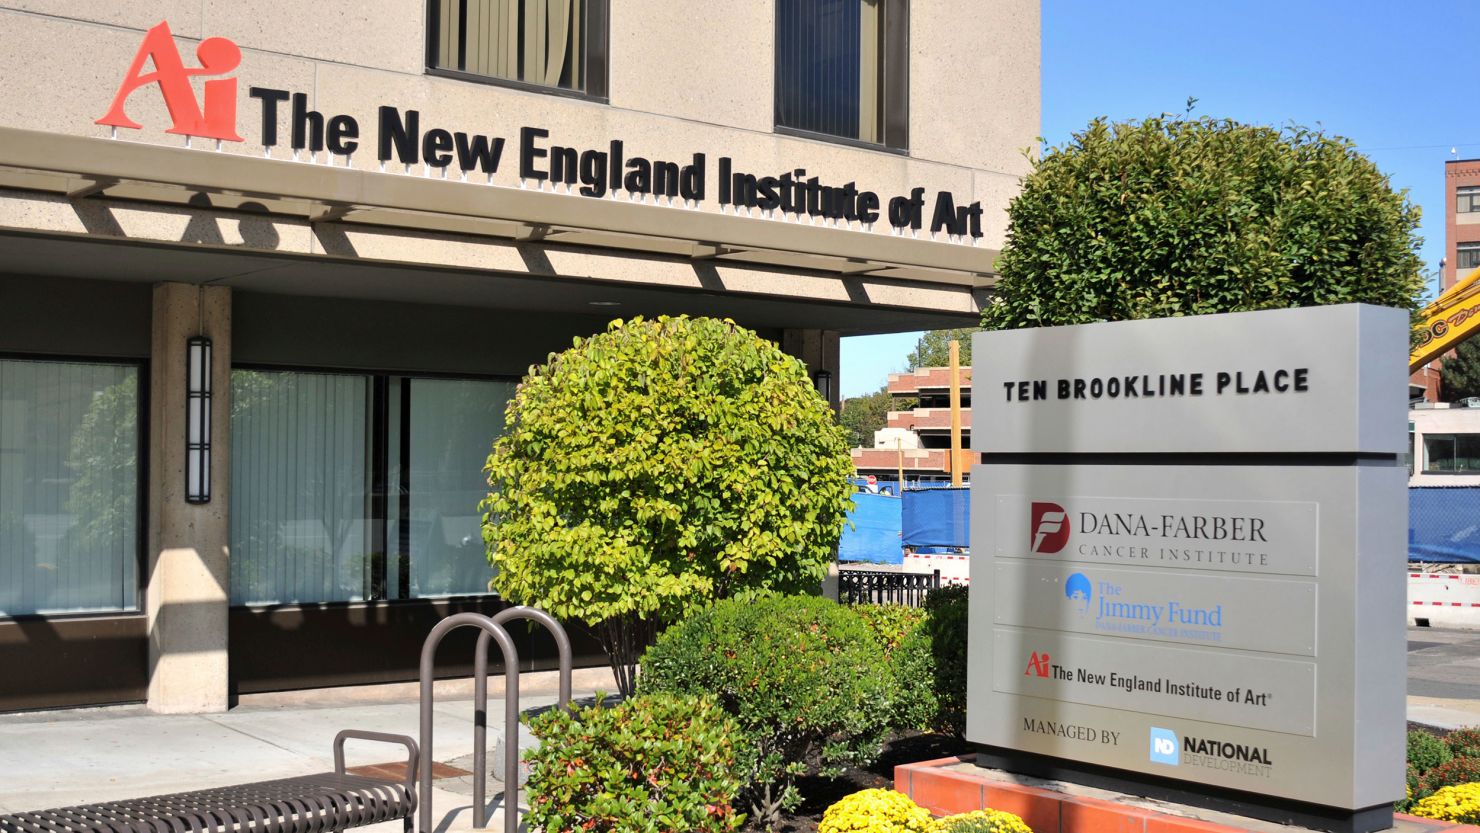 This October 3, 2016, photo shows The New England Institute of Art in Brookline, Massachusetts.